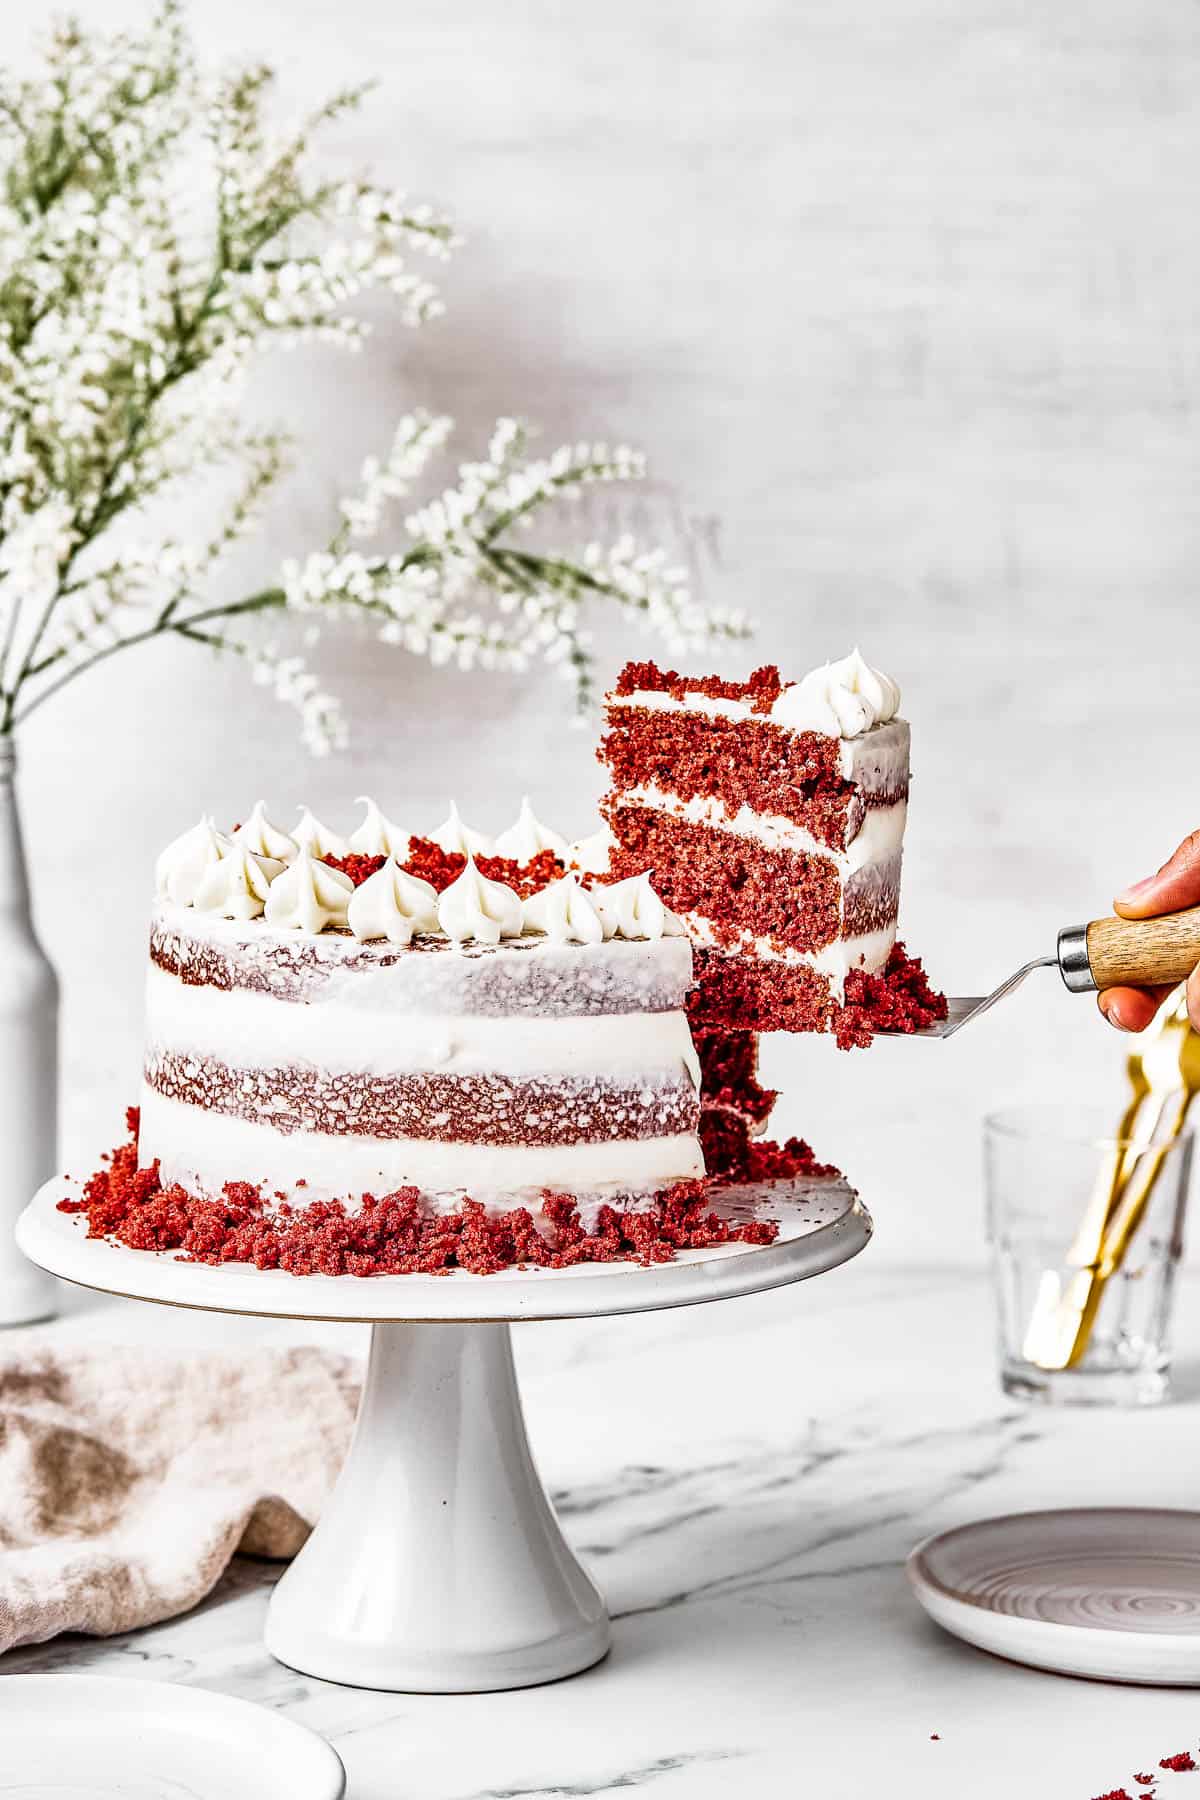 Naturally Red Velvet Cake with Ermine Icing